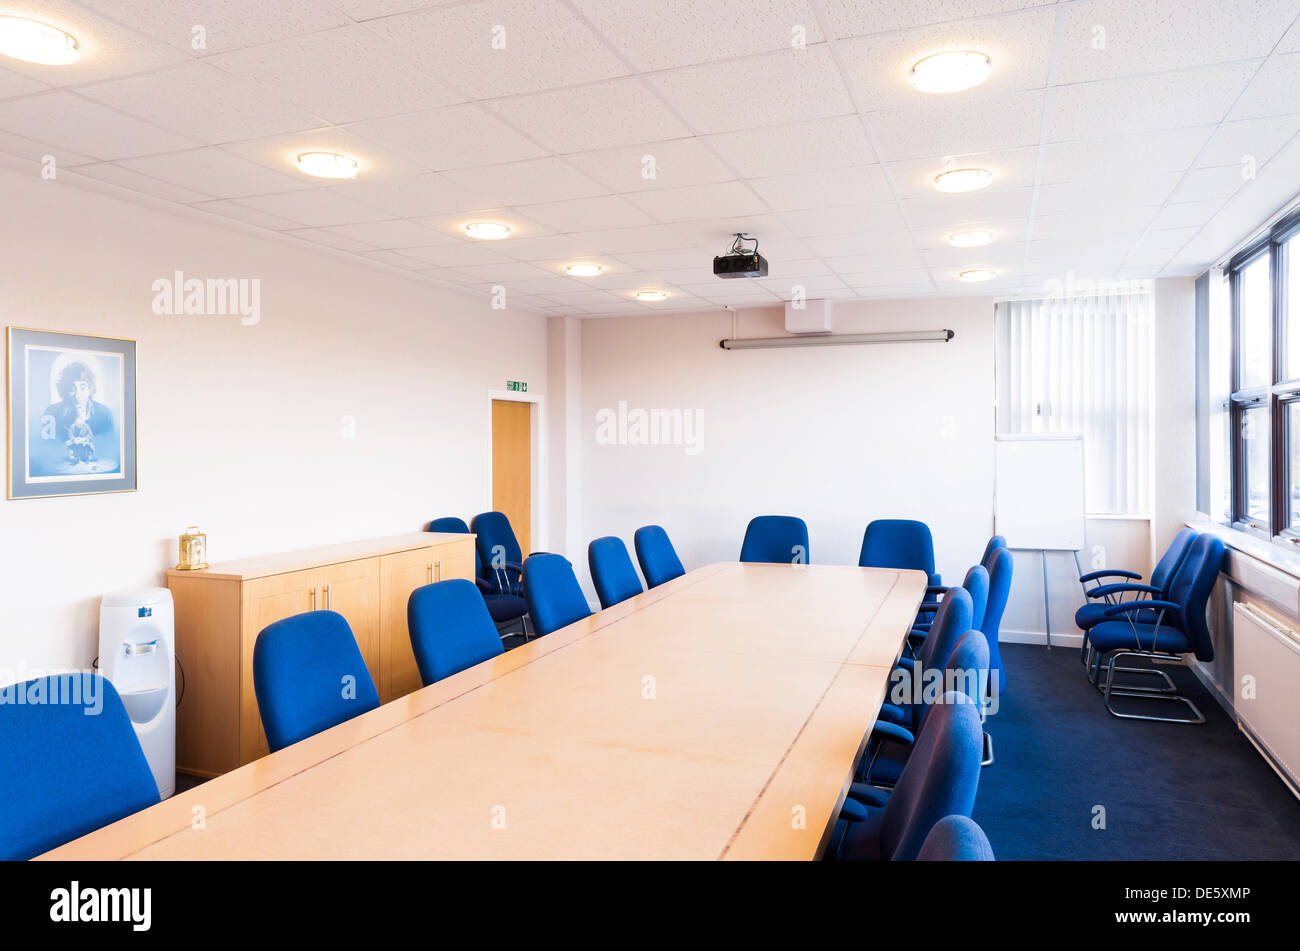 A Typical Boardroom Meeting Room Conference Room Featuring A